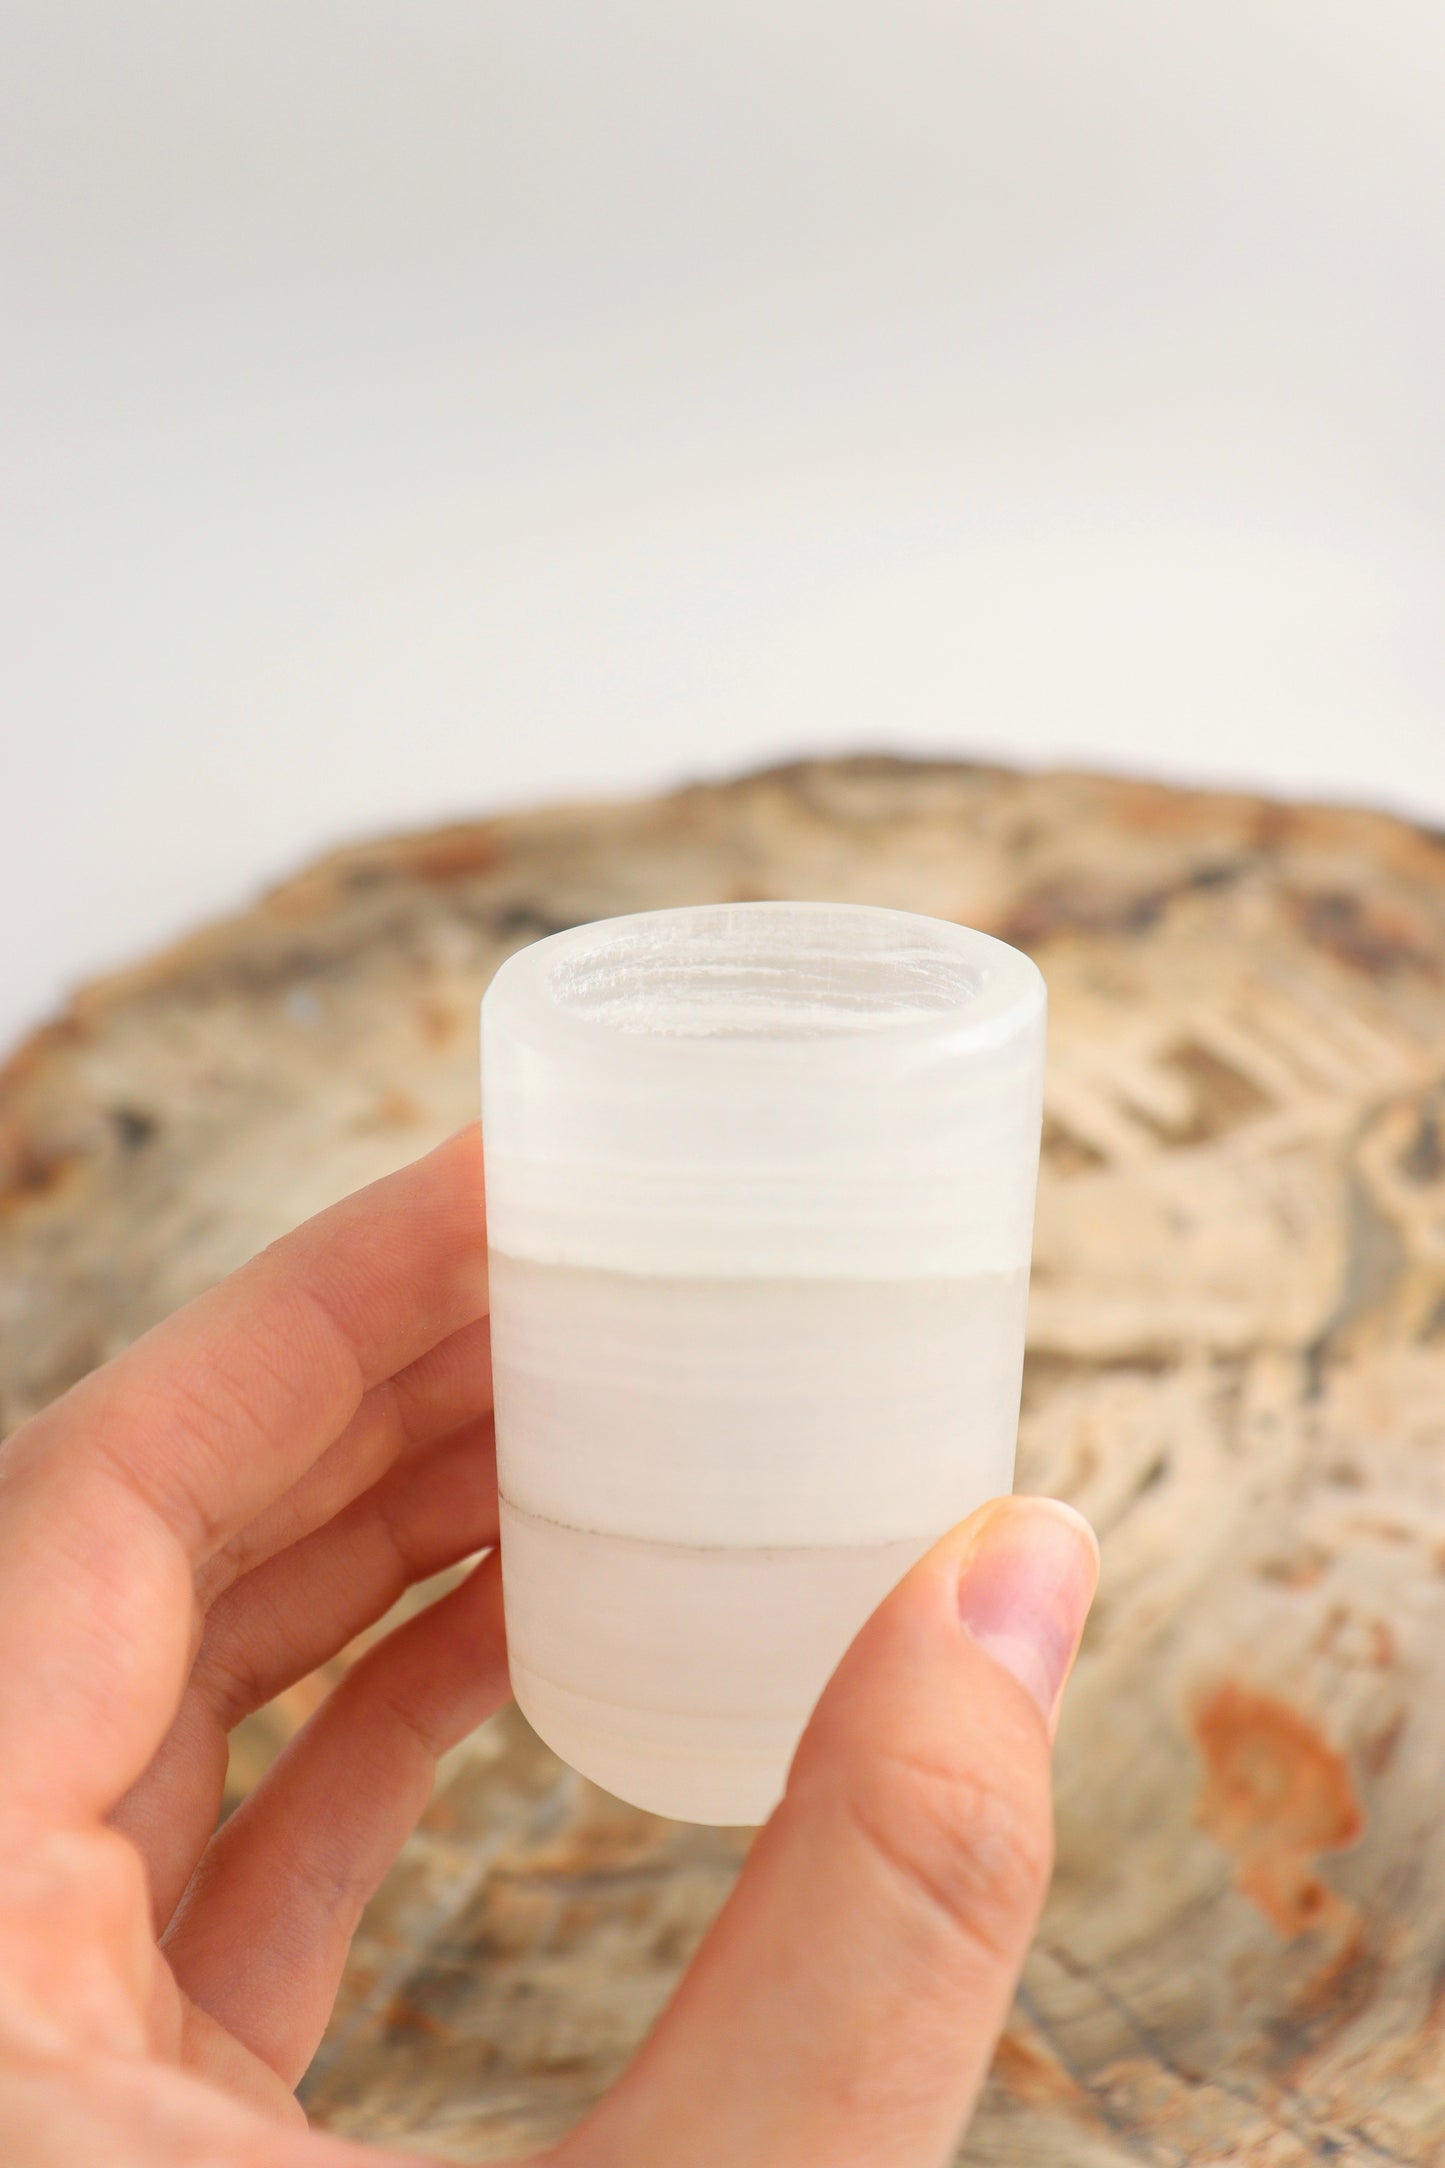 White Onyx Shot Glass Set with Plate